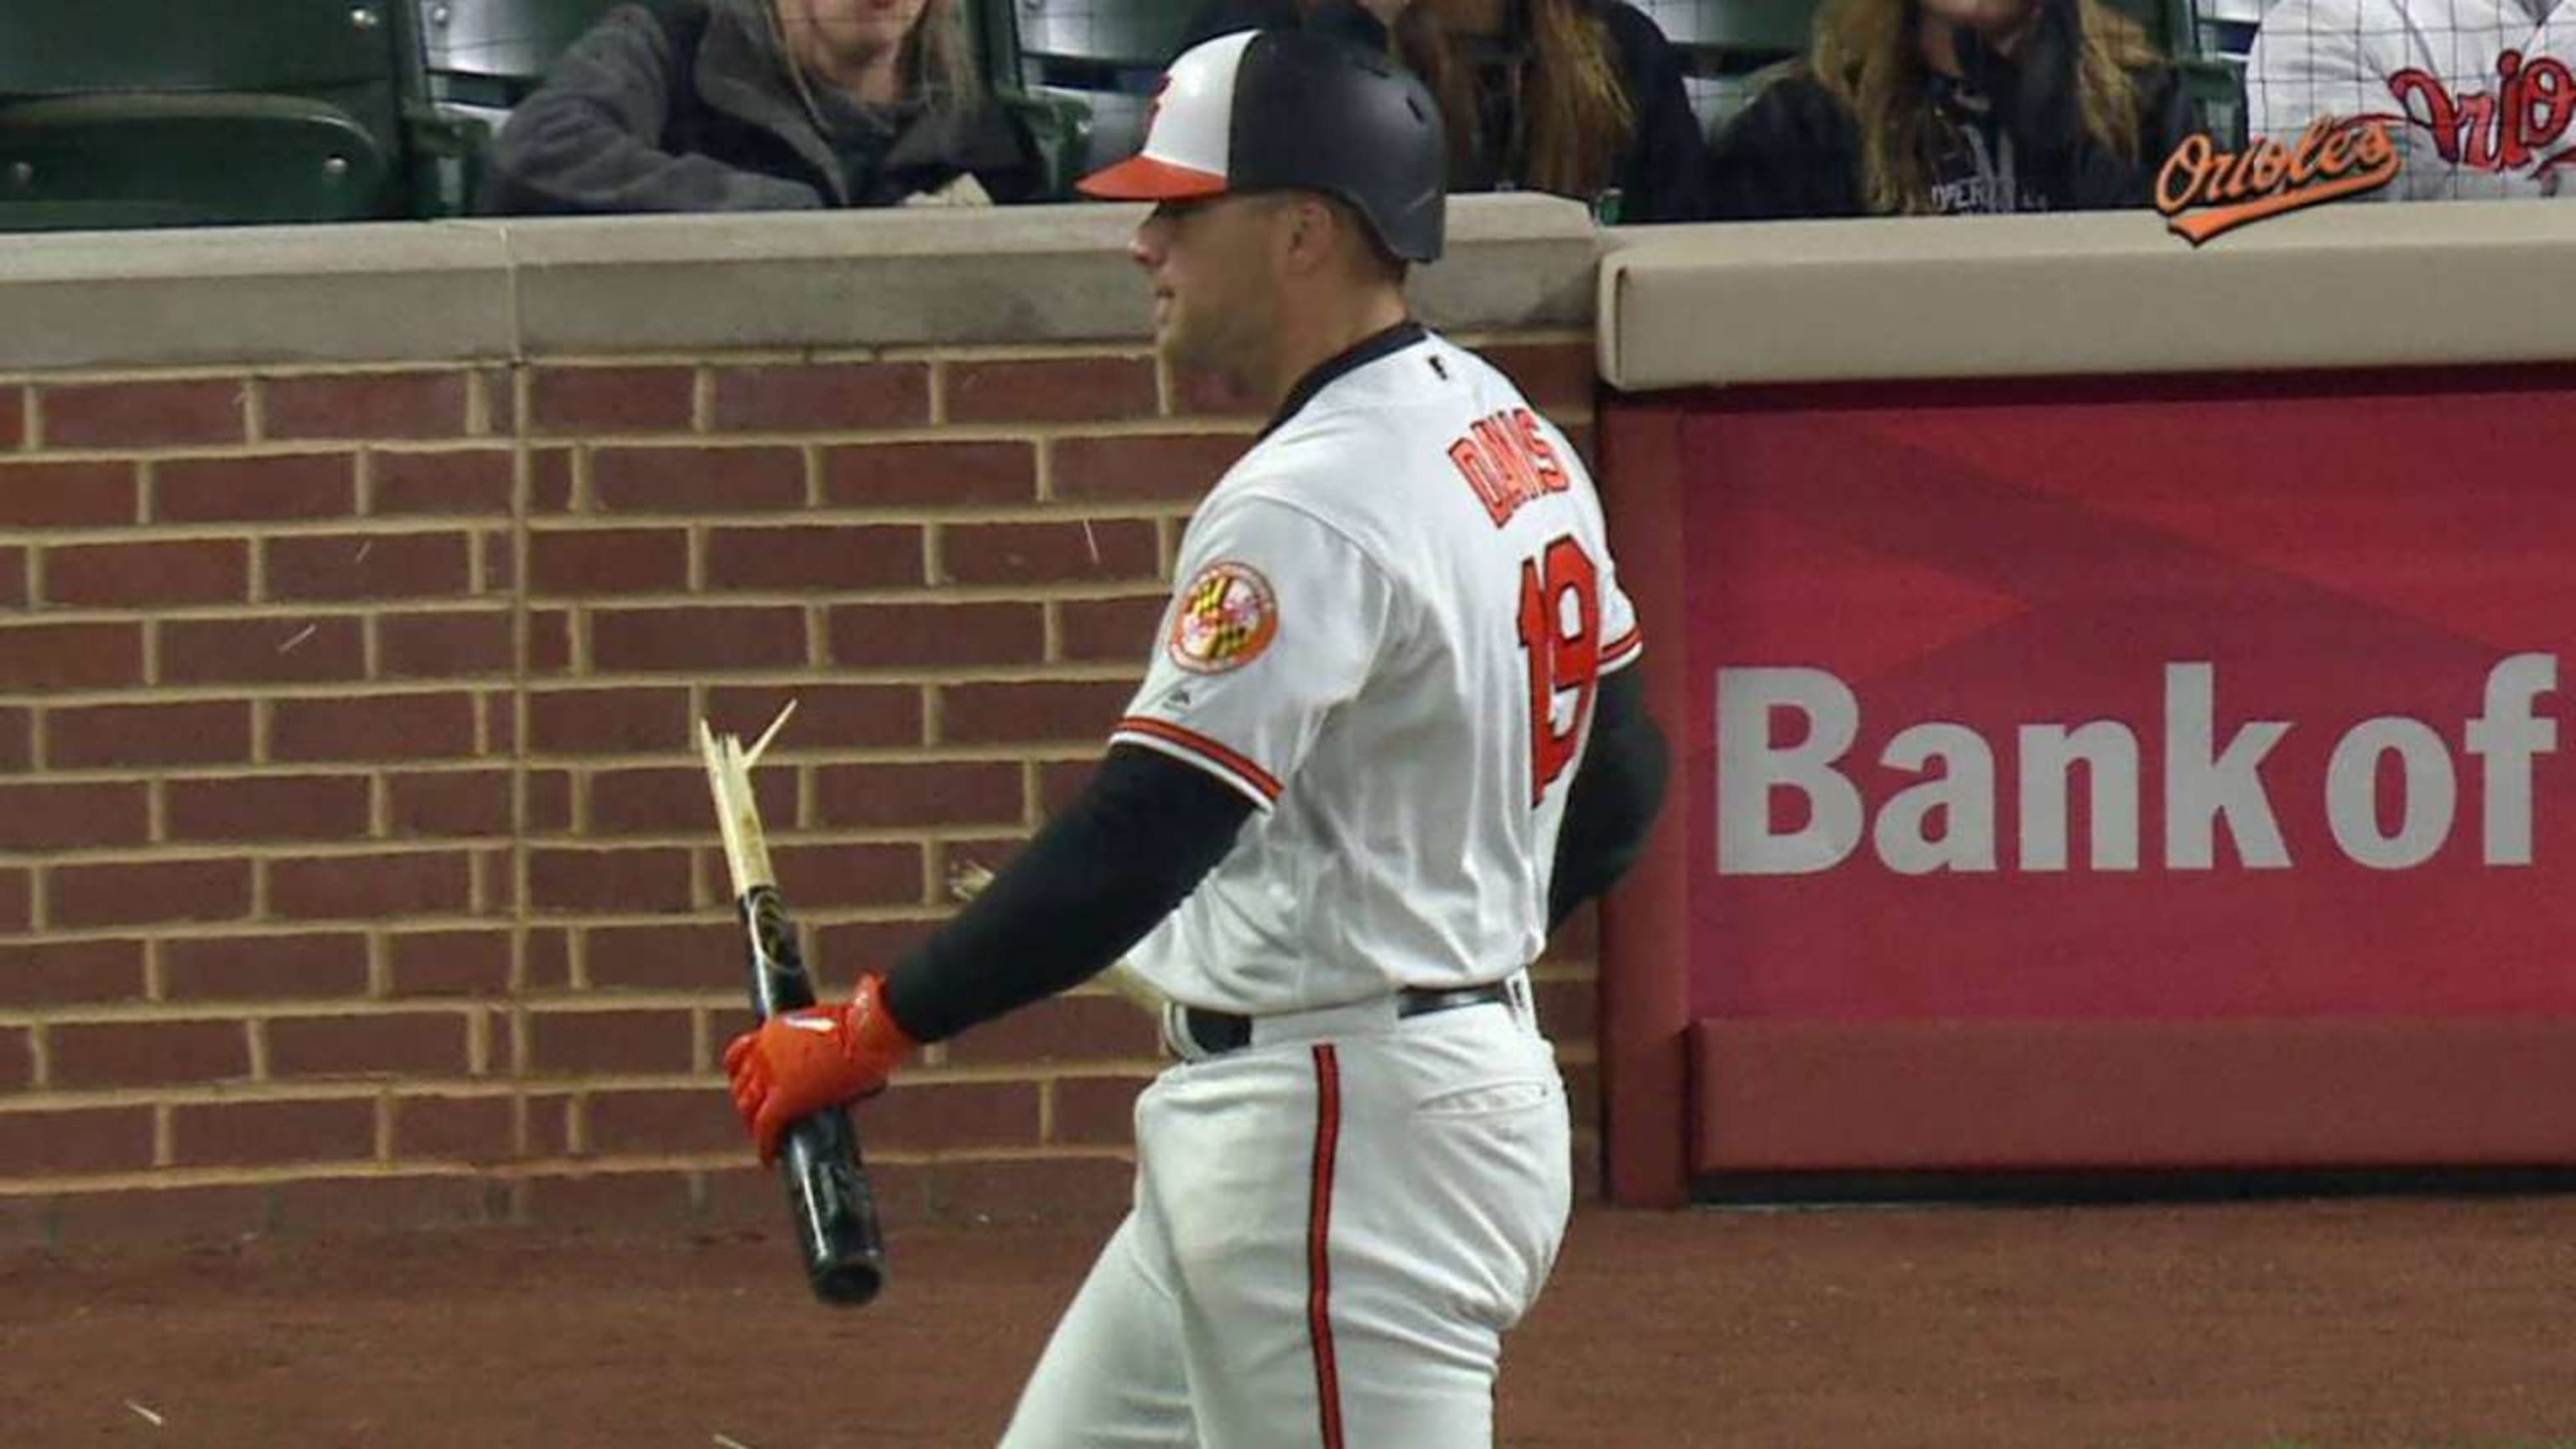 Chris Davis smashed his bat over his knee, reducing it to